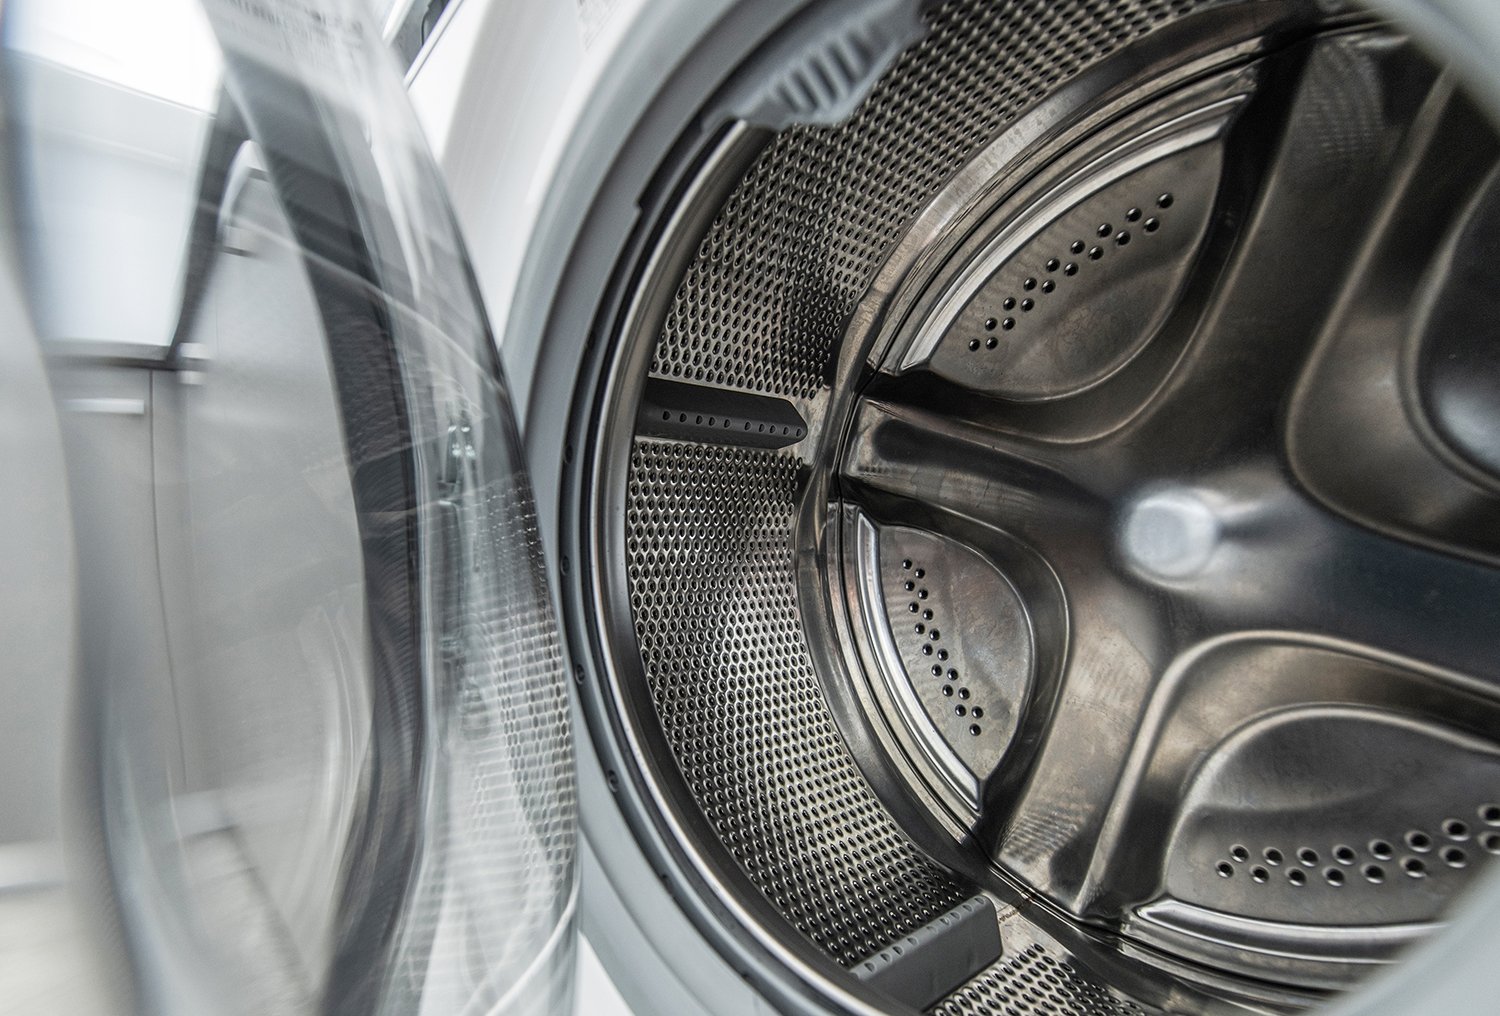 When (and How) to Clean Your Washing Machine